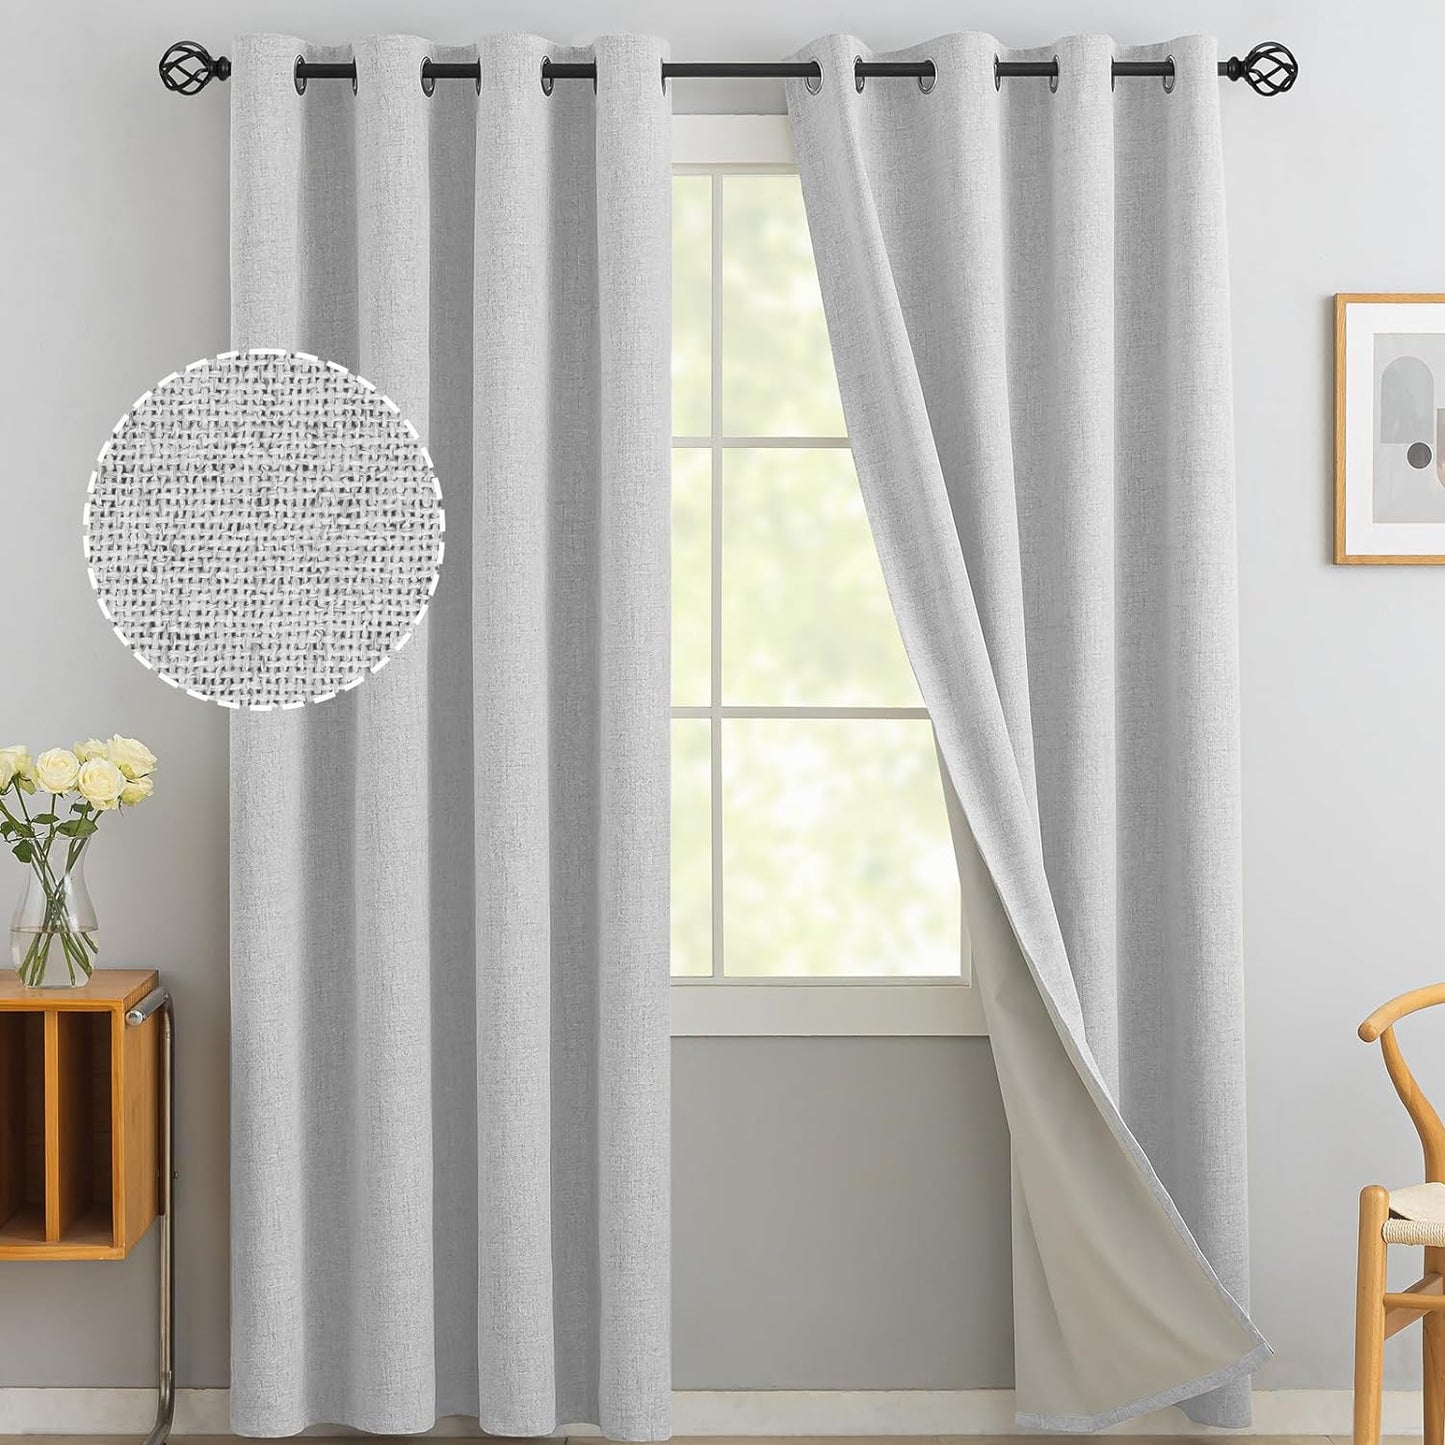 Yakamok Natural Linen Curtains 100% Blackout 84 Inches Long,Room Darkening Textured Curtains for Living Room Thermal Grommet Bedroom Curtains 2 Panels with Greyish White Liner  Yakamok White 52W X 84L / 2 Panels 